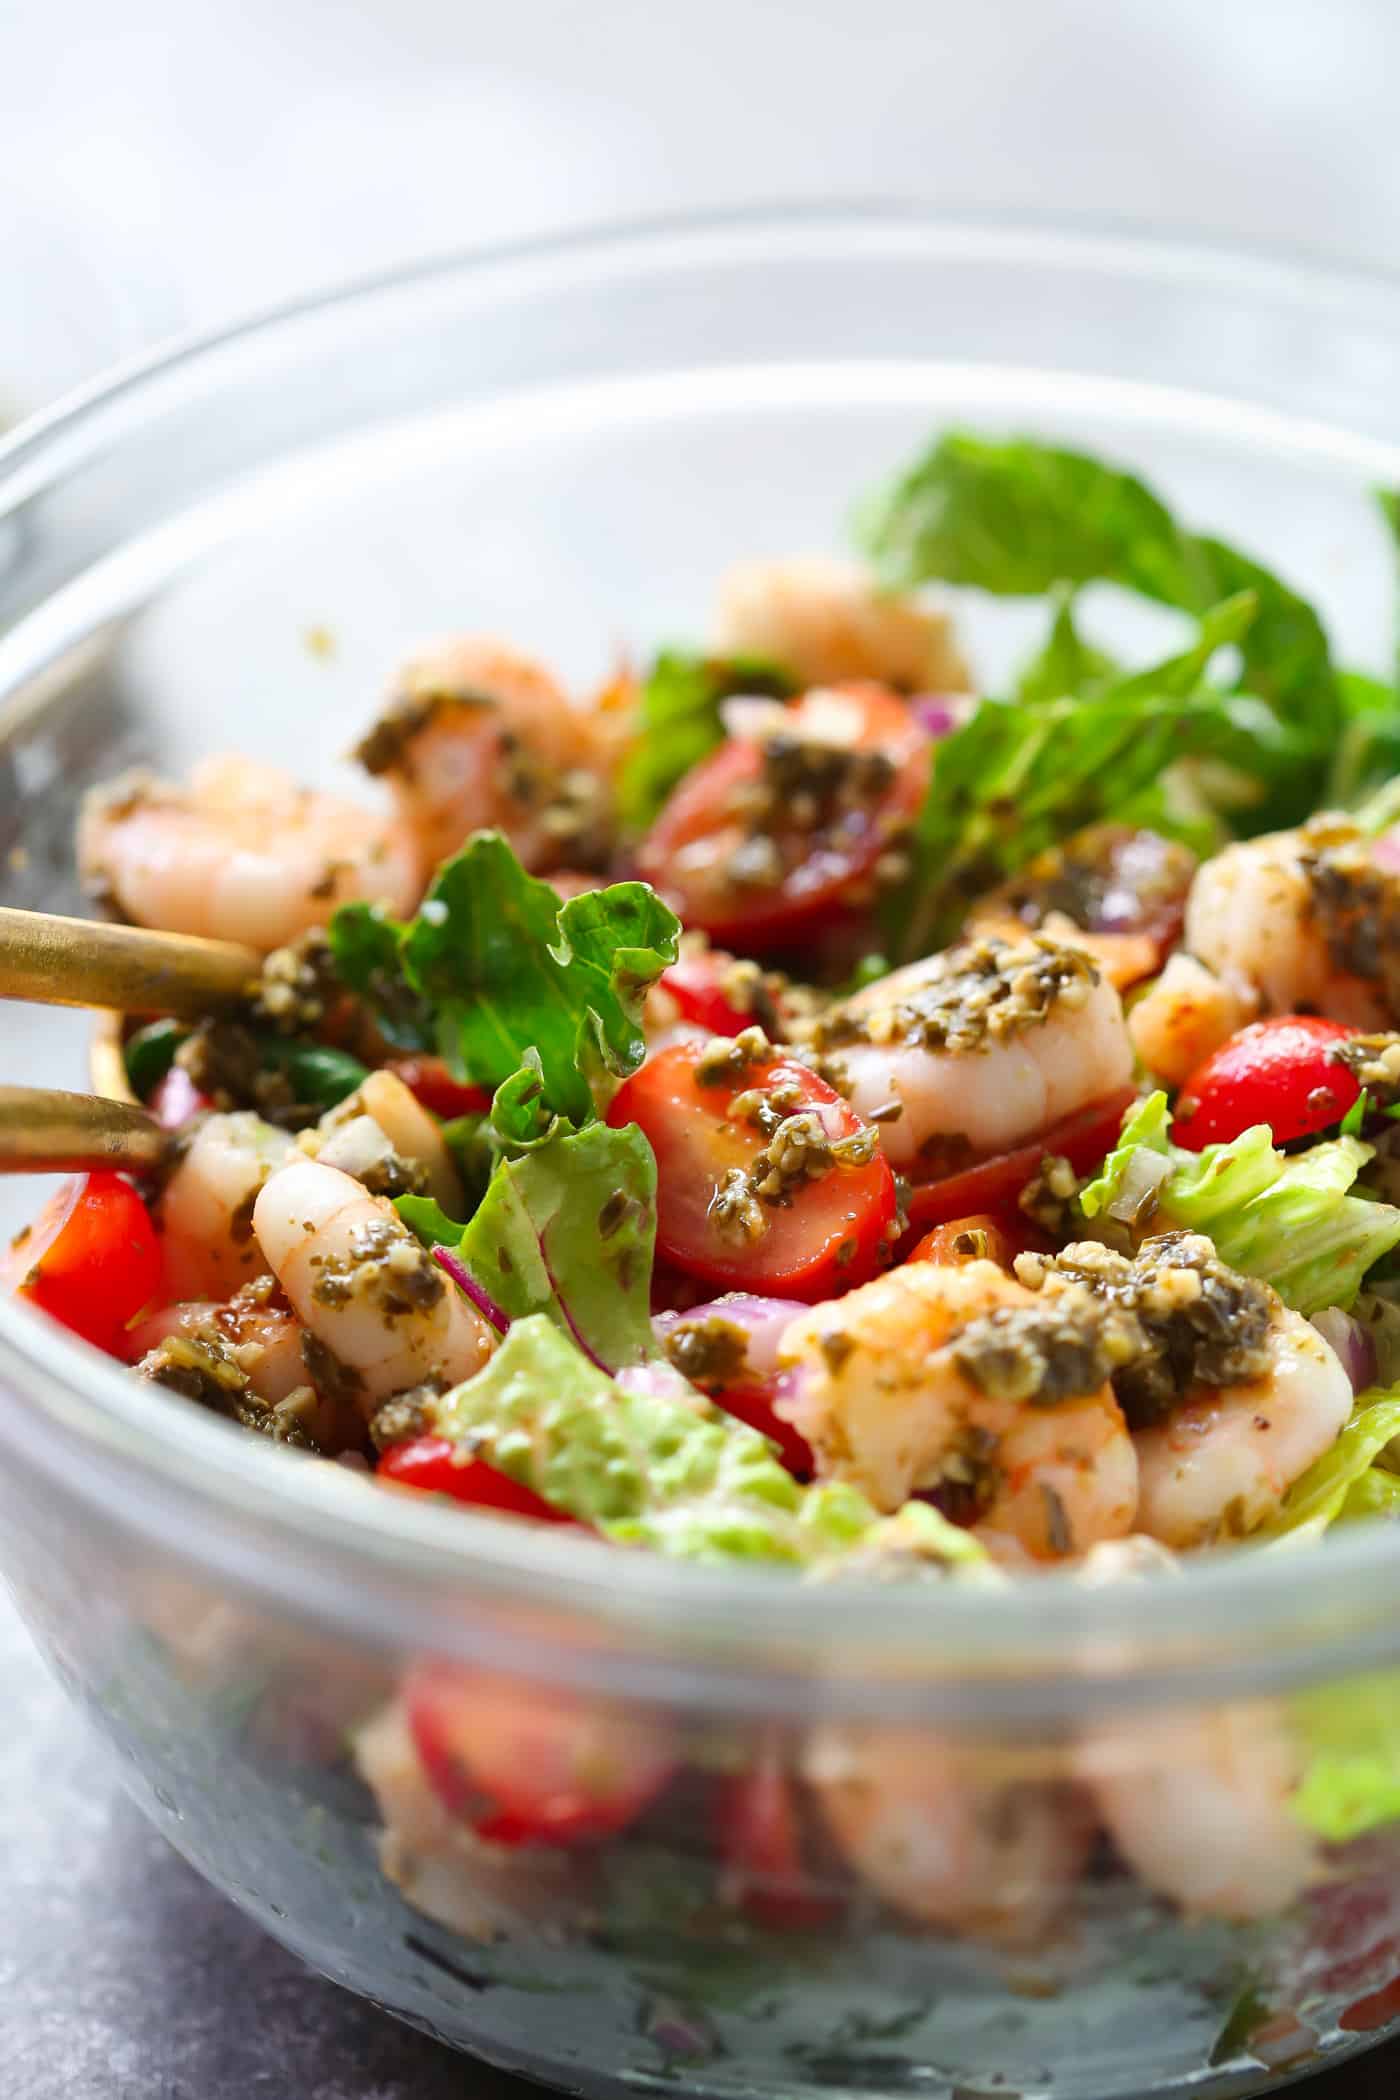 This Pesto Shrimp Tomato Salad Recipe is ready in 10 minutes and it's a perfect quick lunch or light dinner meal for the week. Enjoy! 